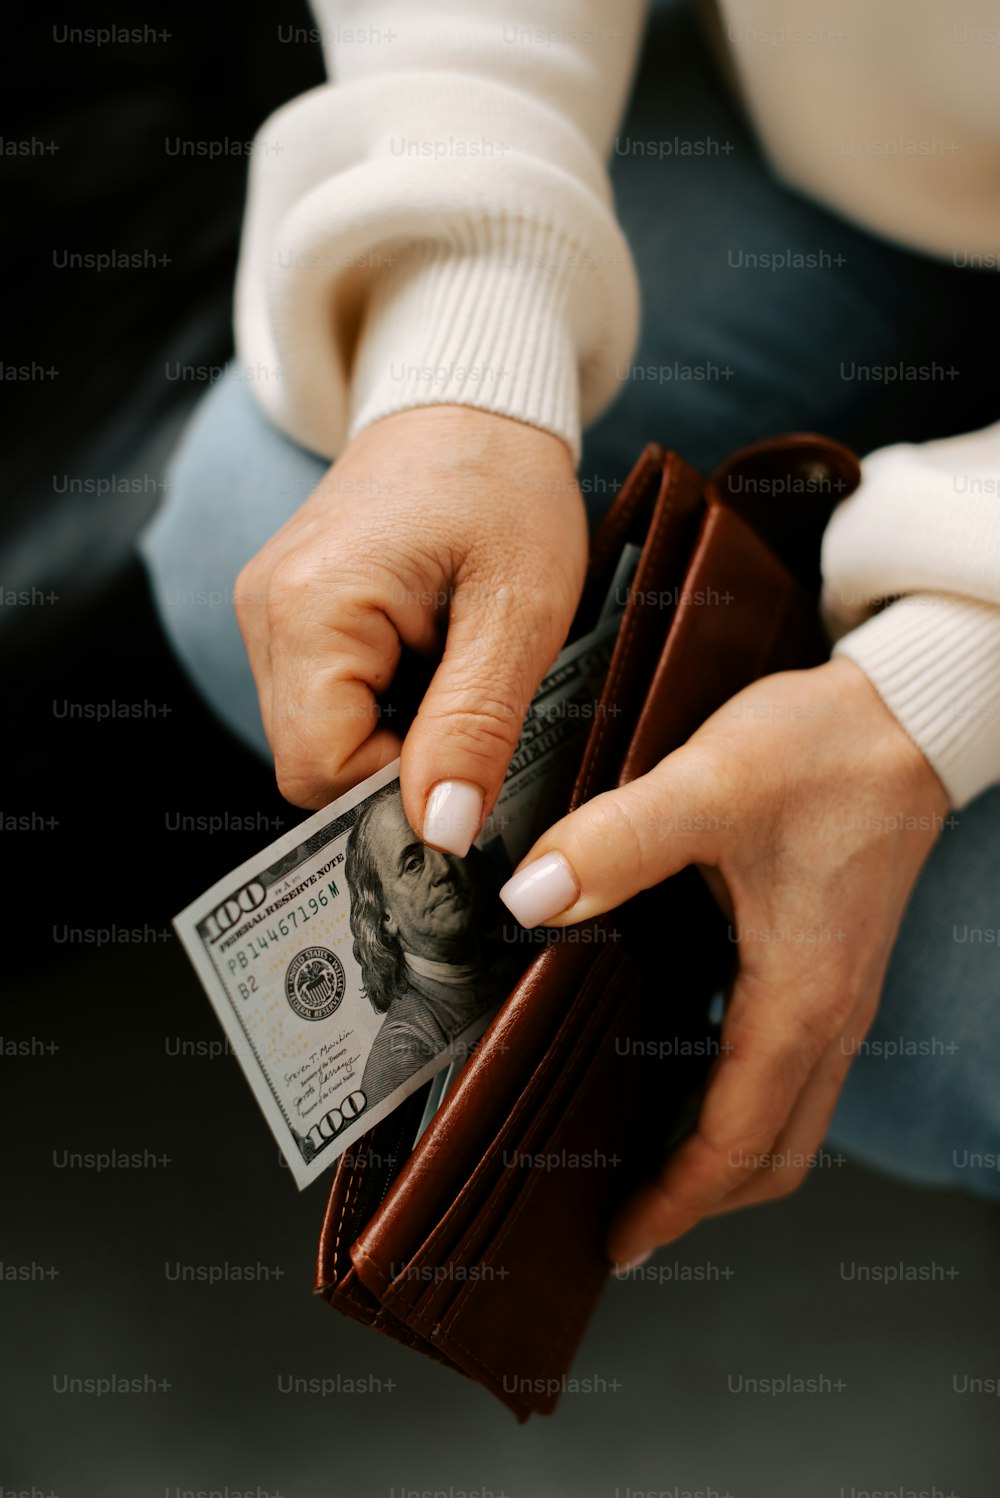 a woman is holding a wallet and money